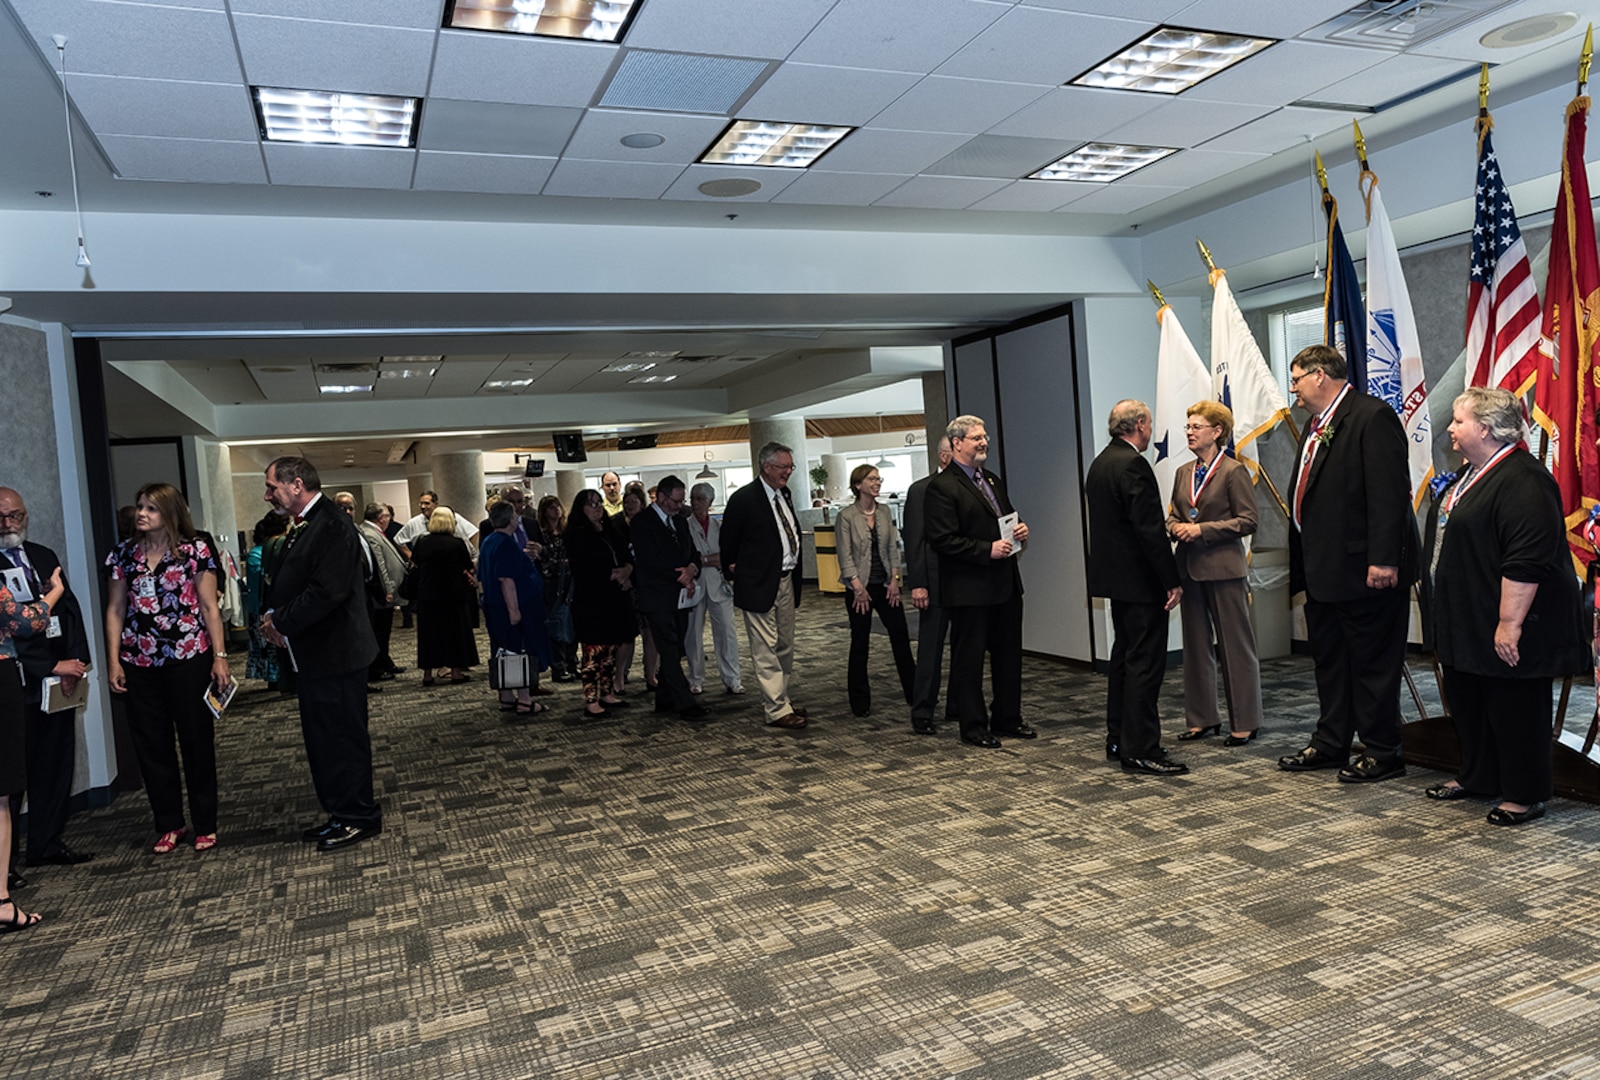 Ceremony attendees line up to offer their congratulations to members of the newly inducted 2017 DLA Land and Maritime Hall of Fame Class.